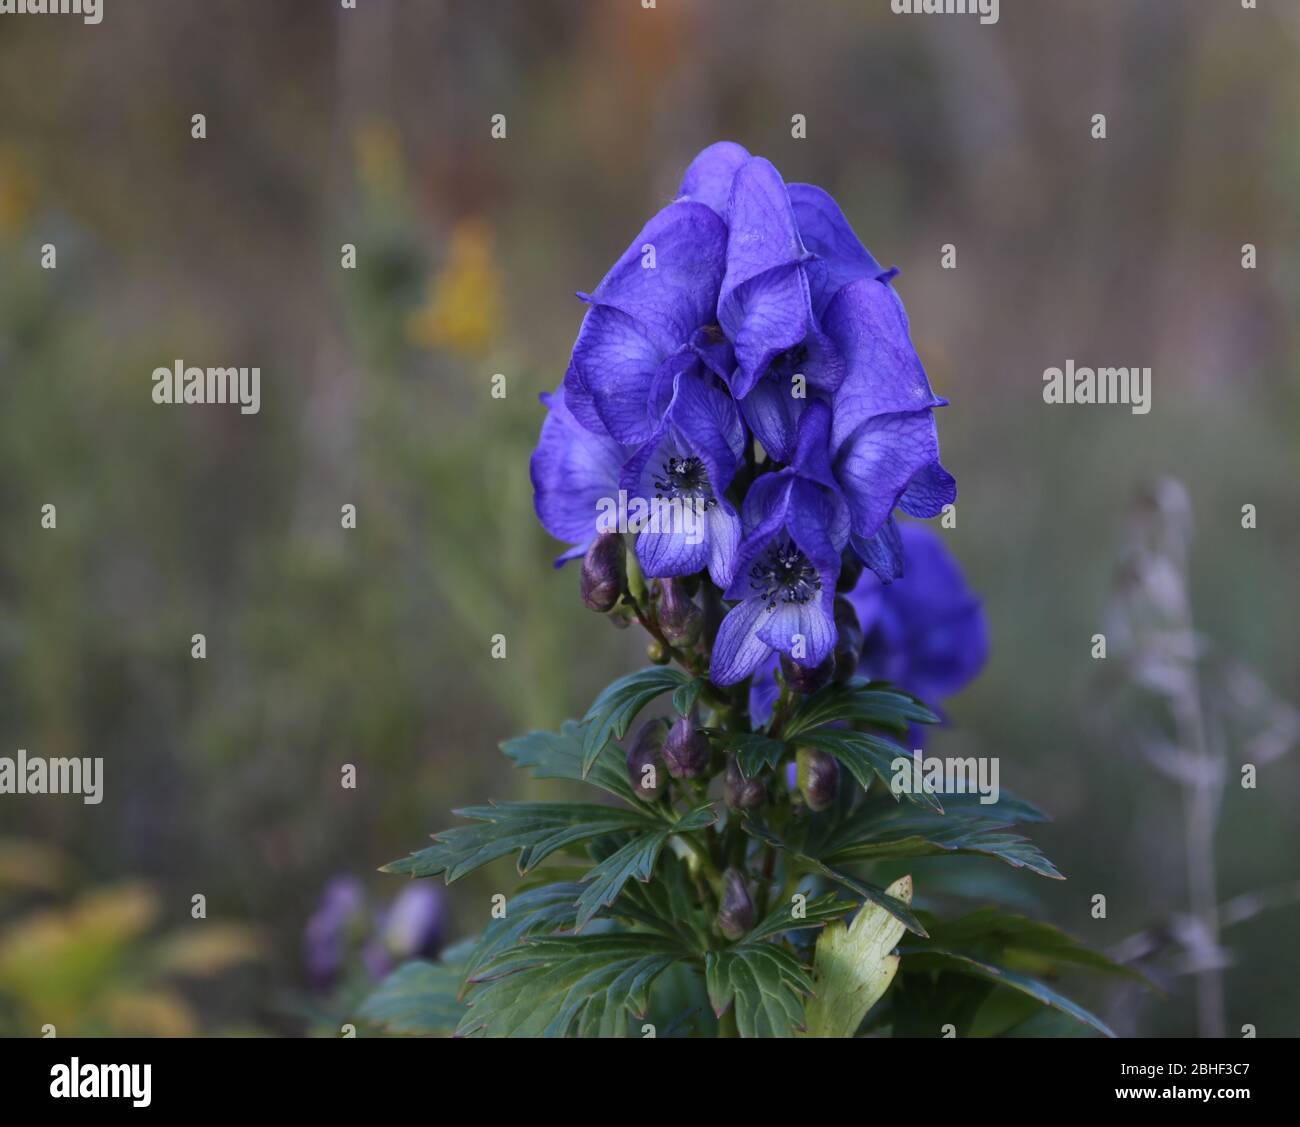 The flowers of the beautiful, but highly poisonous Azure Monkshood (Aconitum fischeri).  Shot in early fall, in Ontario, Canada. Stock Photo